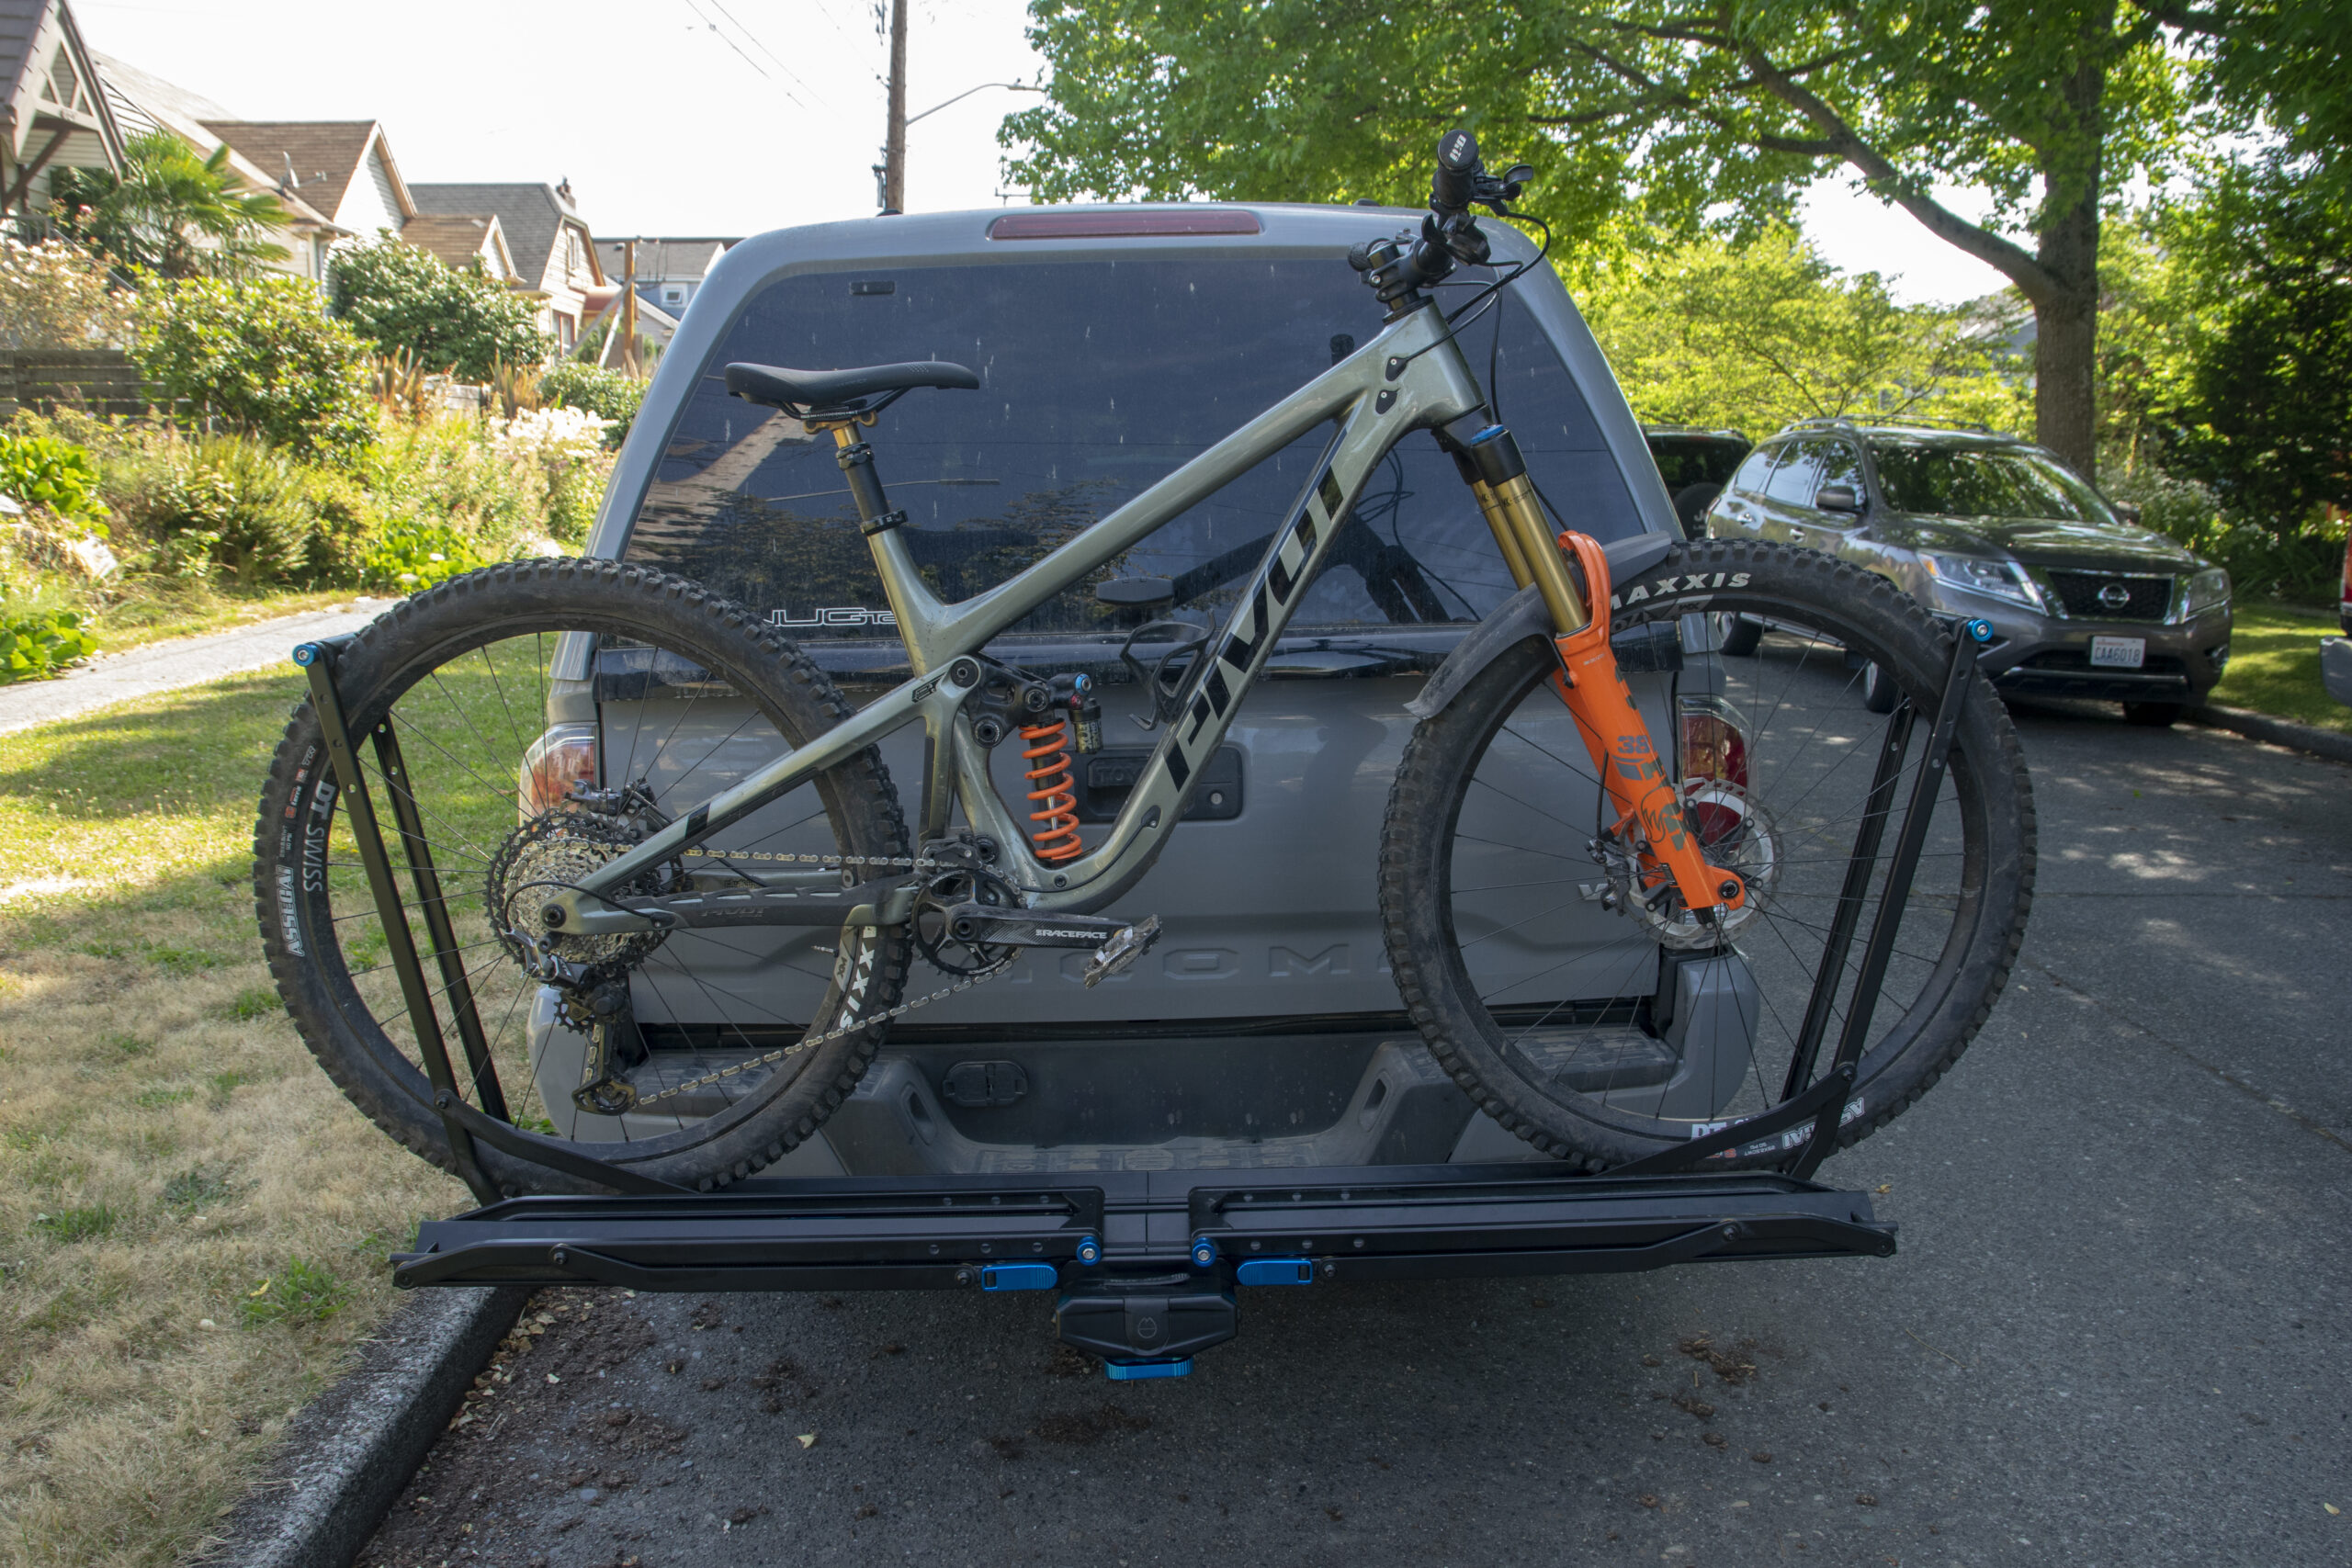 David Golay reviews the Rocky Mounts GuideRail Bike Rack for BLISTER